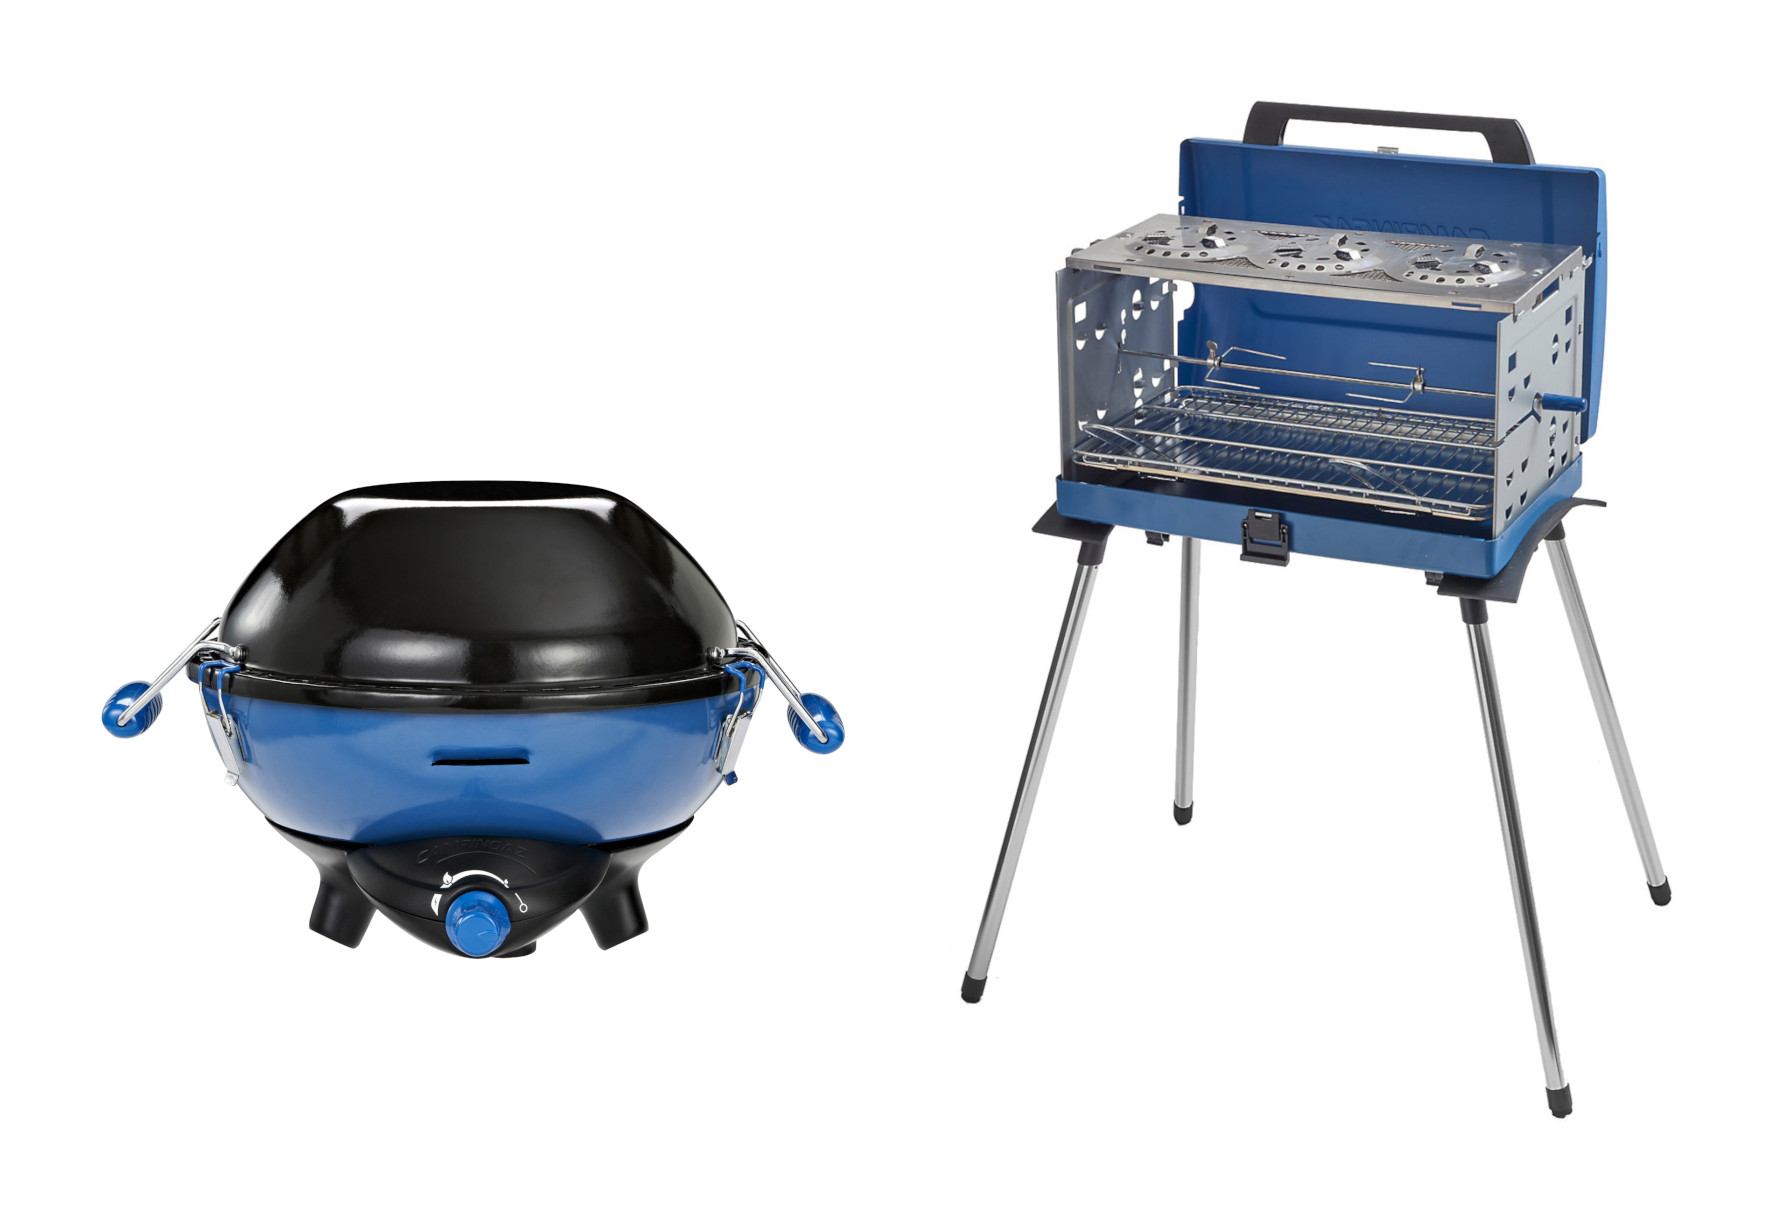 Campingaz gas grills, compact and powerful